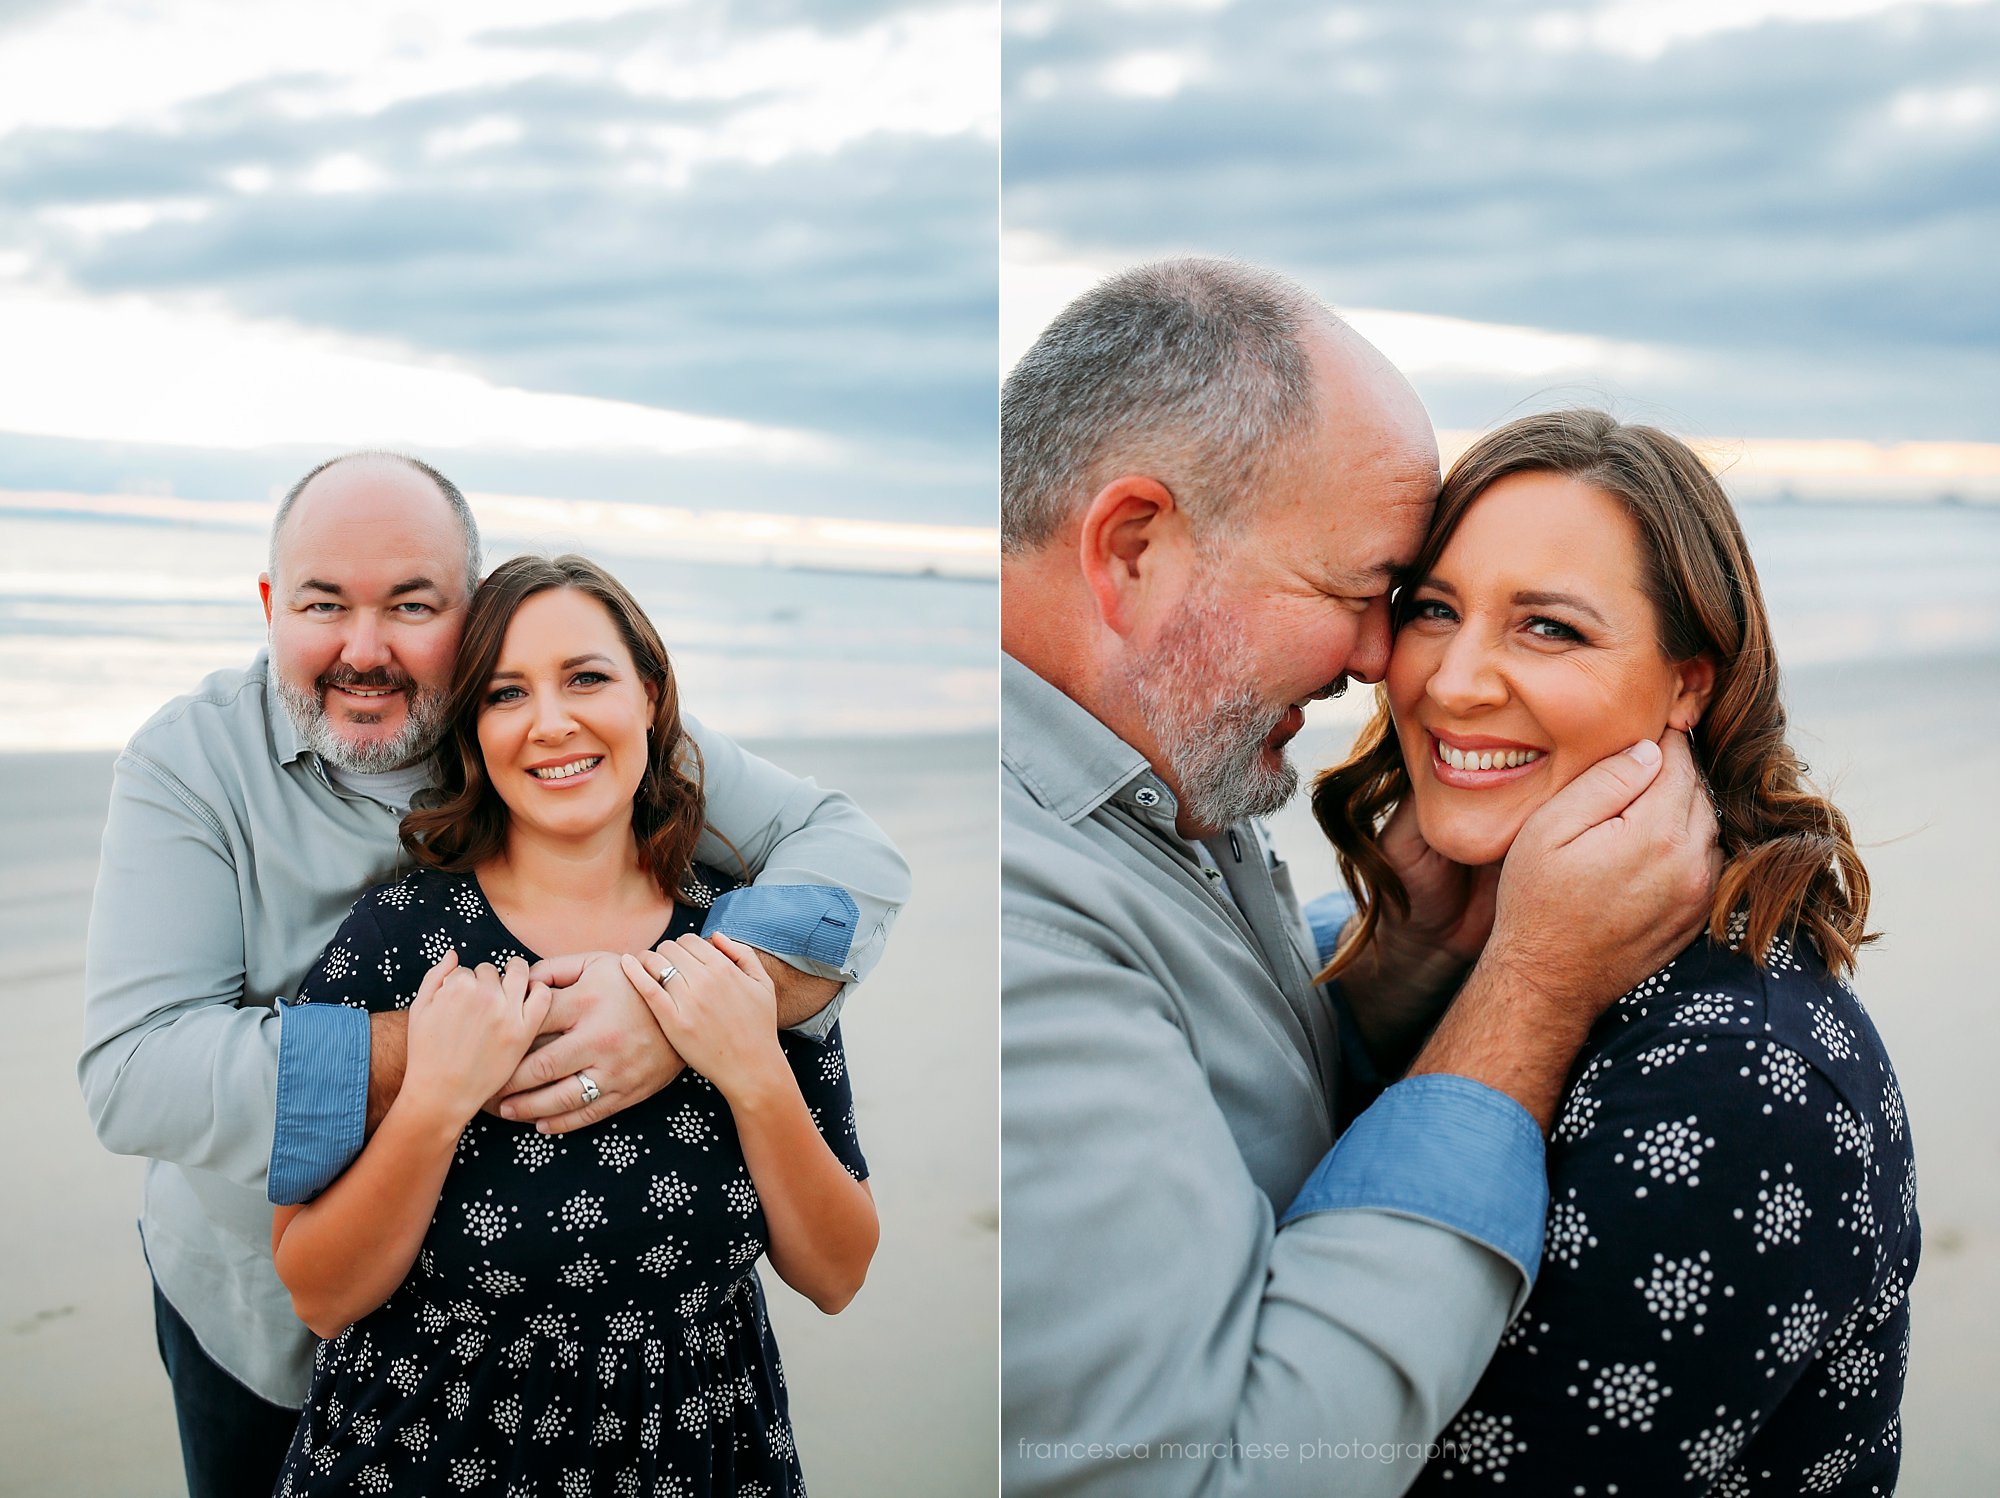 Francesca Marchese Photography Long Beach family photographer sunset beach session - Orange County, Los Angeles photographer mom and dad at family session